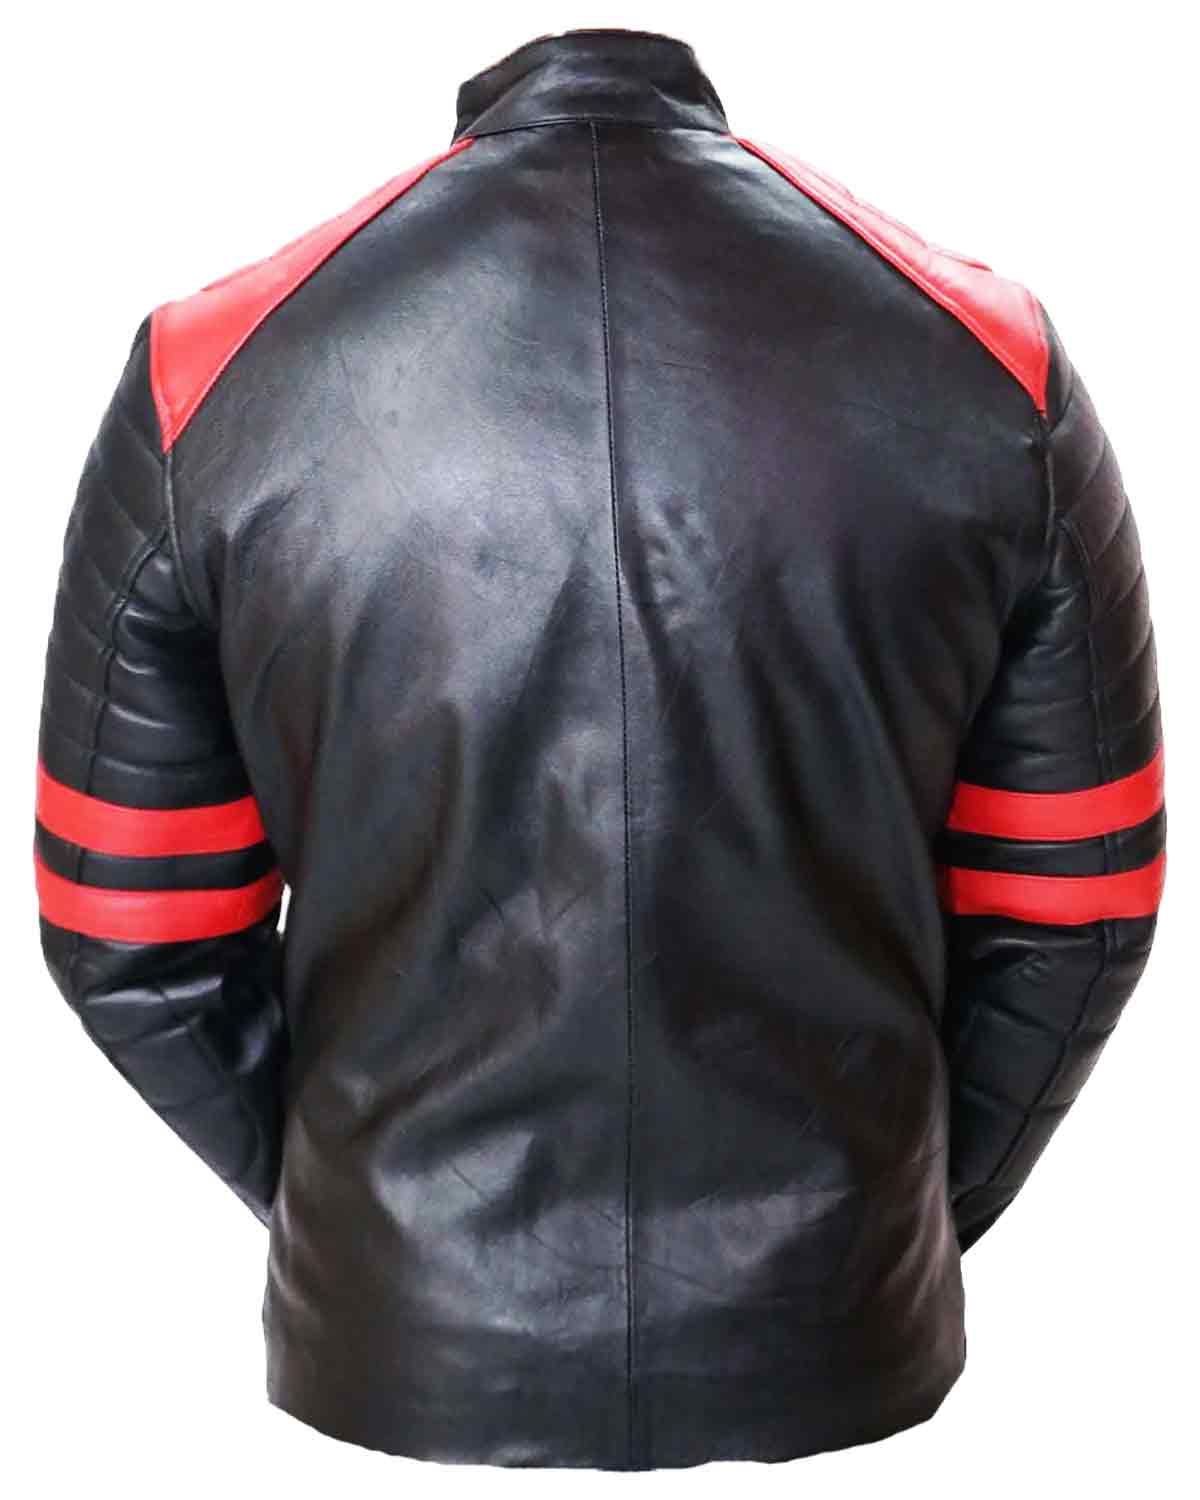 MotorCycleJackets Black Café Racer with Red Strip Genuine Lambskin Leather Jacket